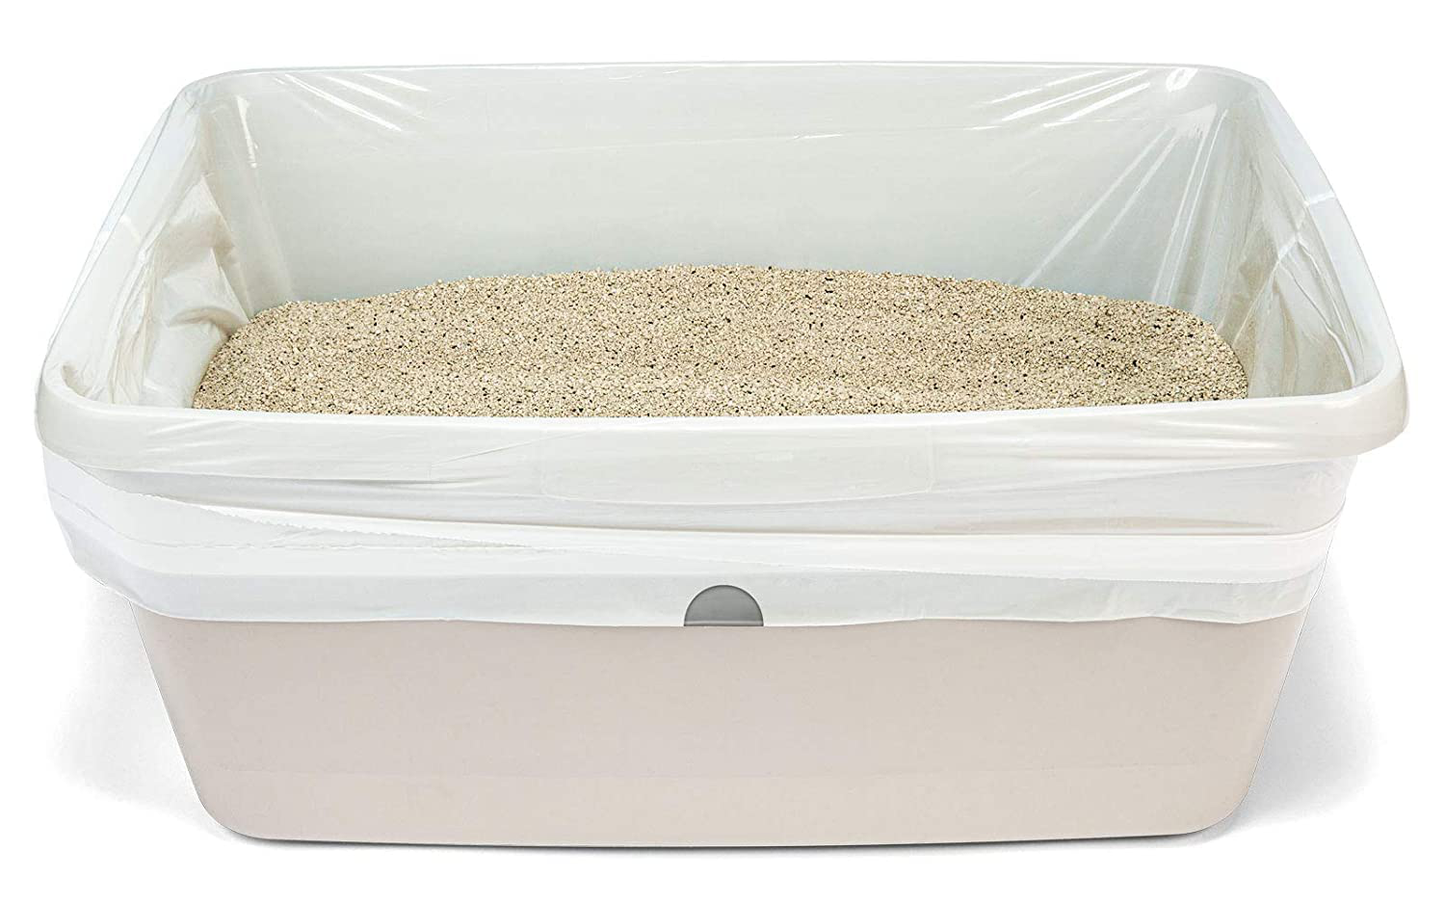 Aluf Plastics 2 MIL Thick Cat Litter Box Liners - 36" X 19" - Odor Free Leak Proof Disposable Heavy Duty Jumbo Durable Coreless Drawstring Scratch Tear Resistant - Pack of 50 - for Kitty Waste Poop Animals & Pet Supplies > Pet Supplies > Cat Supplies > Cat Litter Box Liners Aluf Plastics   